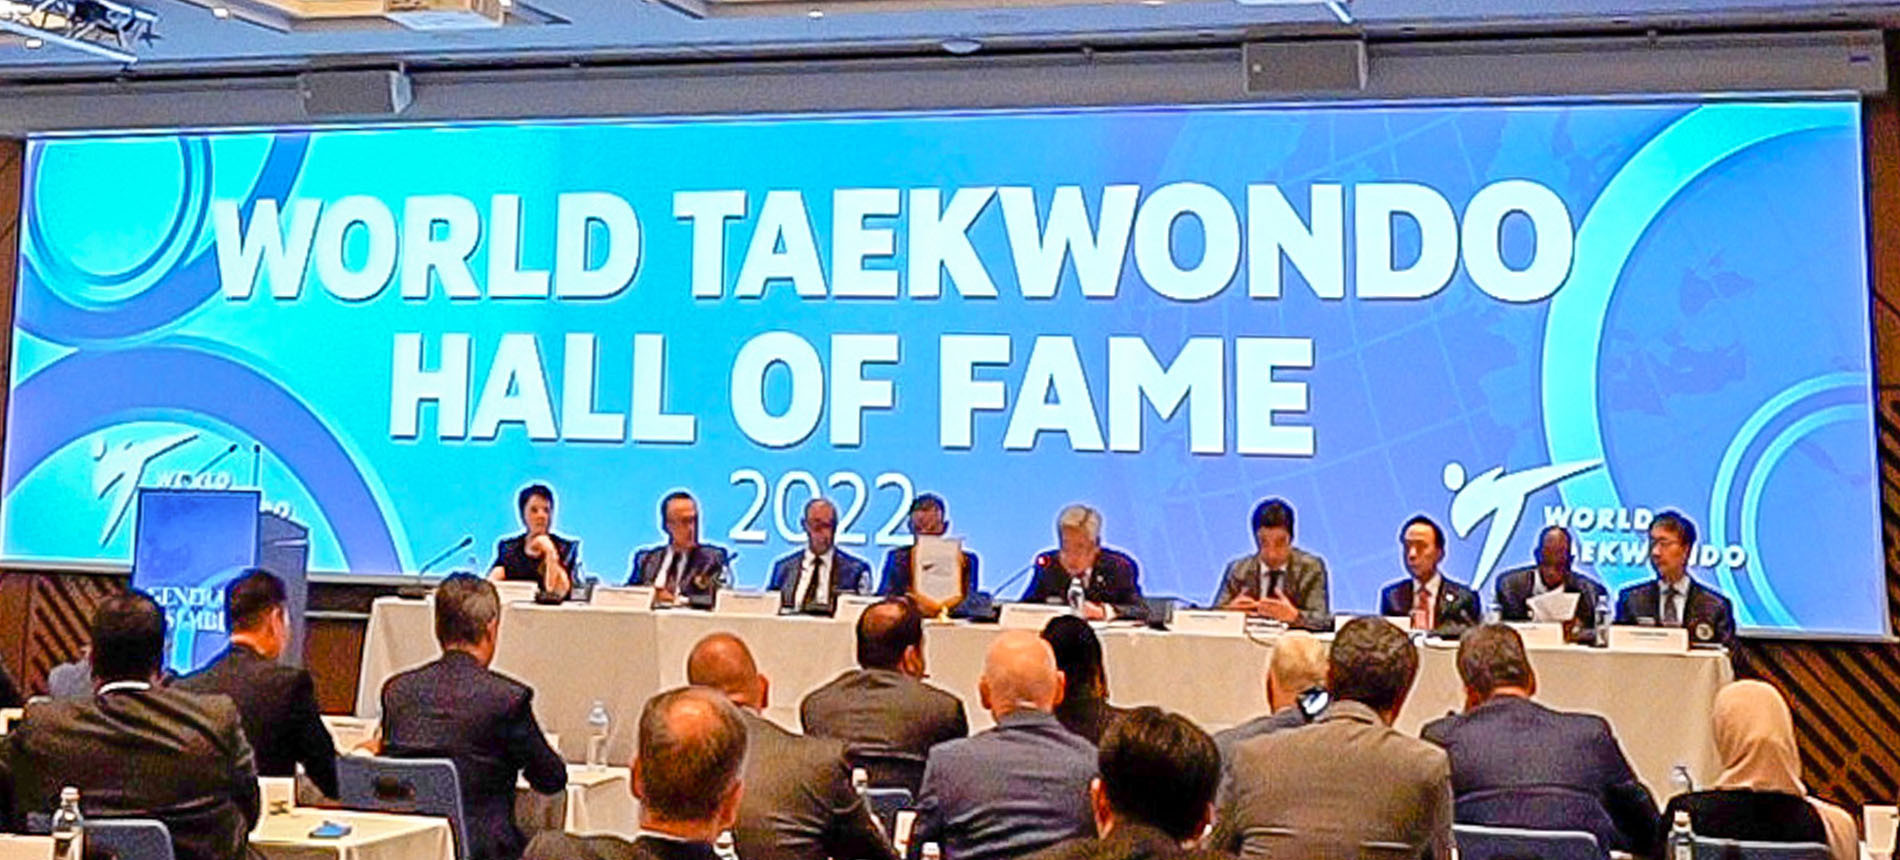 Founder Kim and former IOC President Samaranch inducted to World Taekwondo Hall of Fame at General Assembly